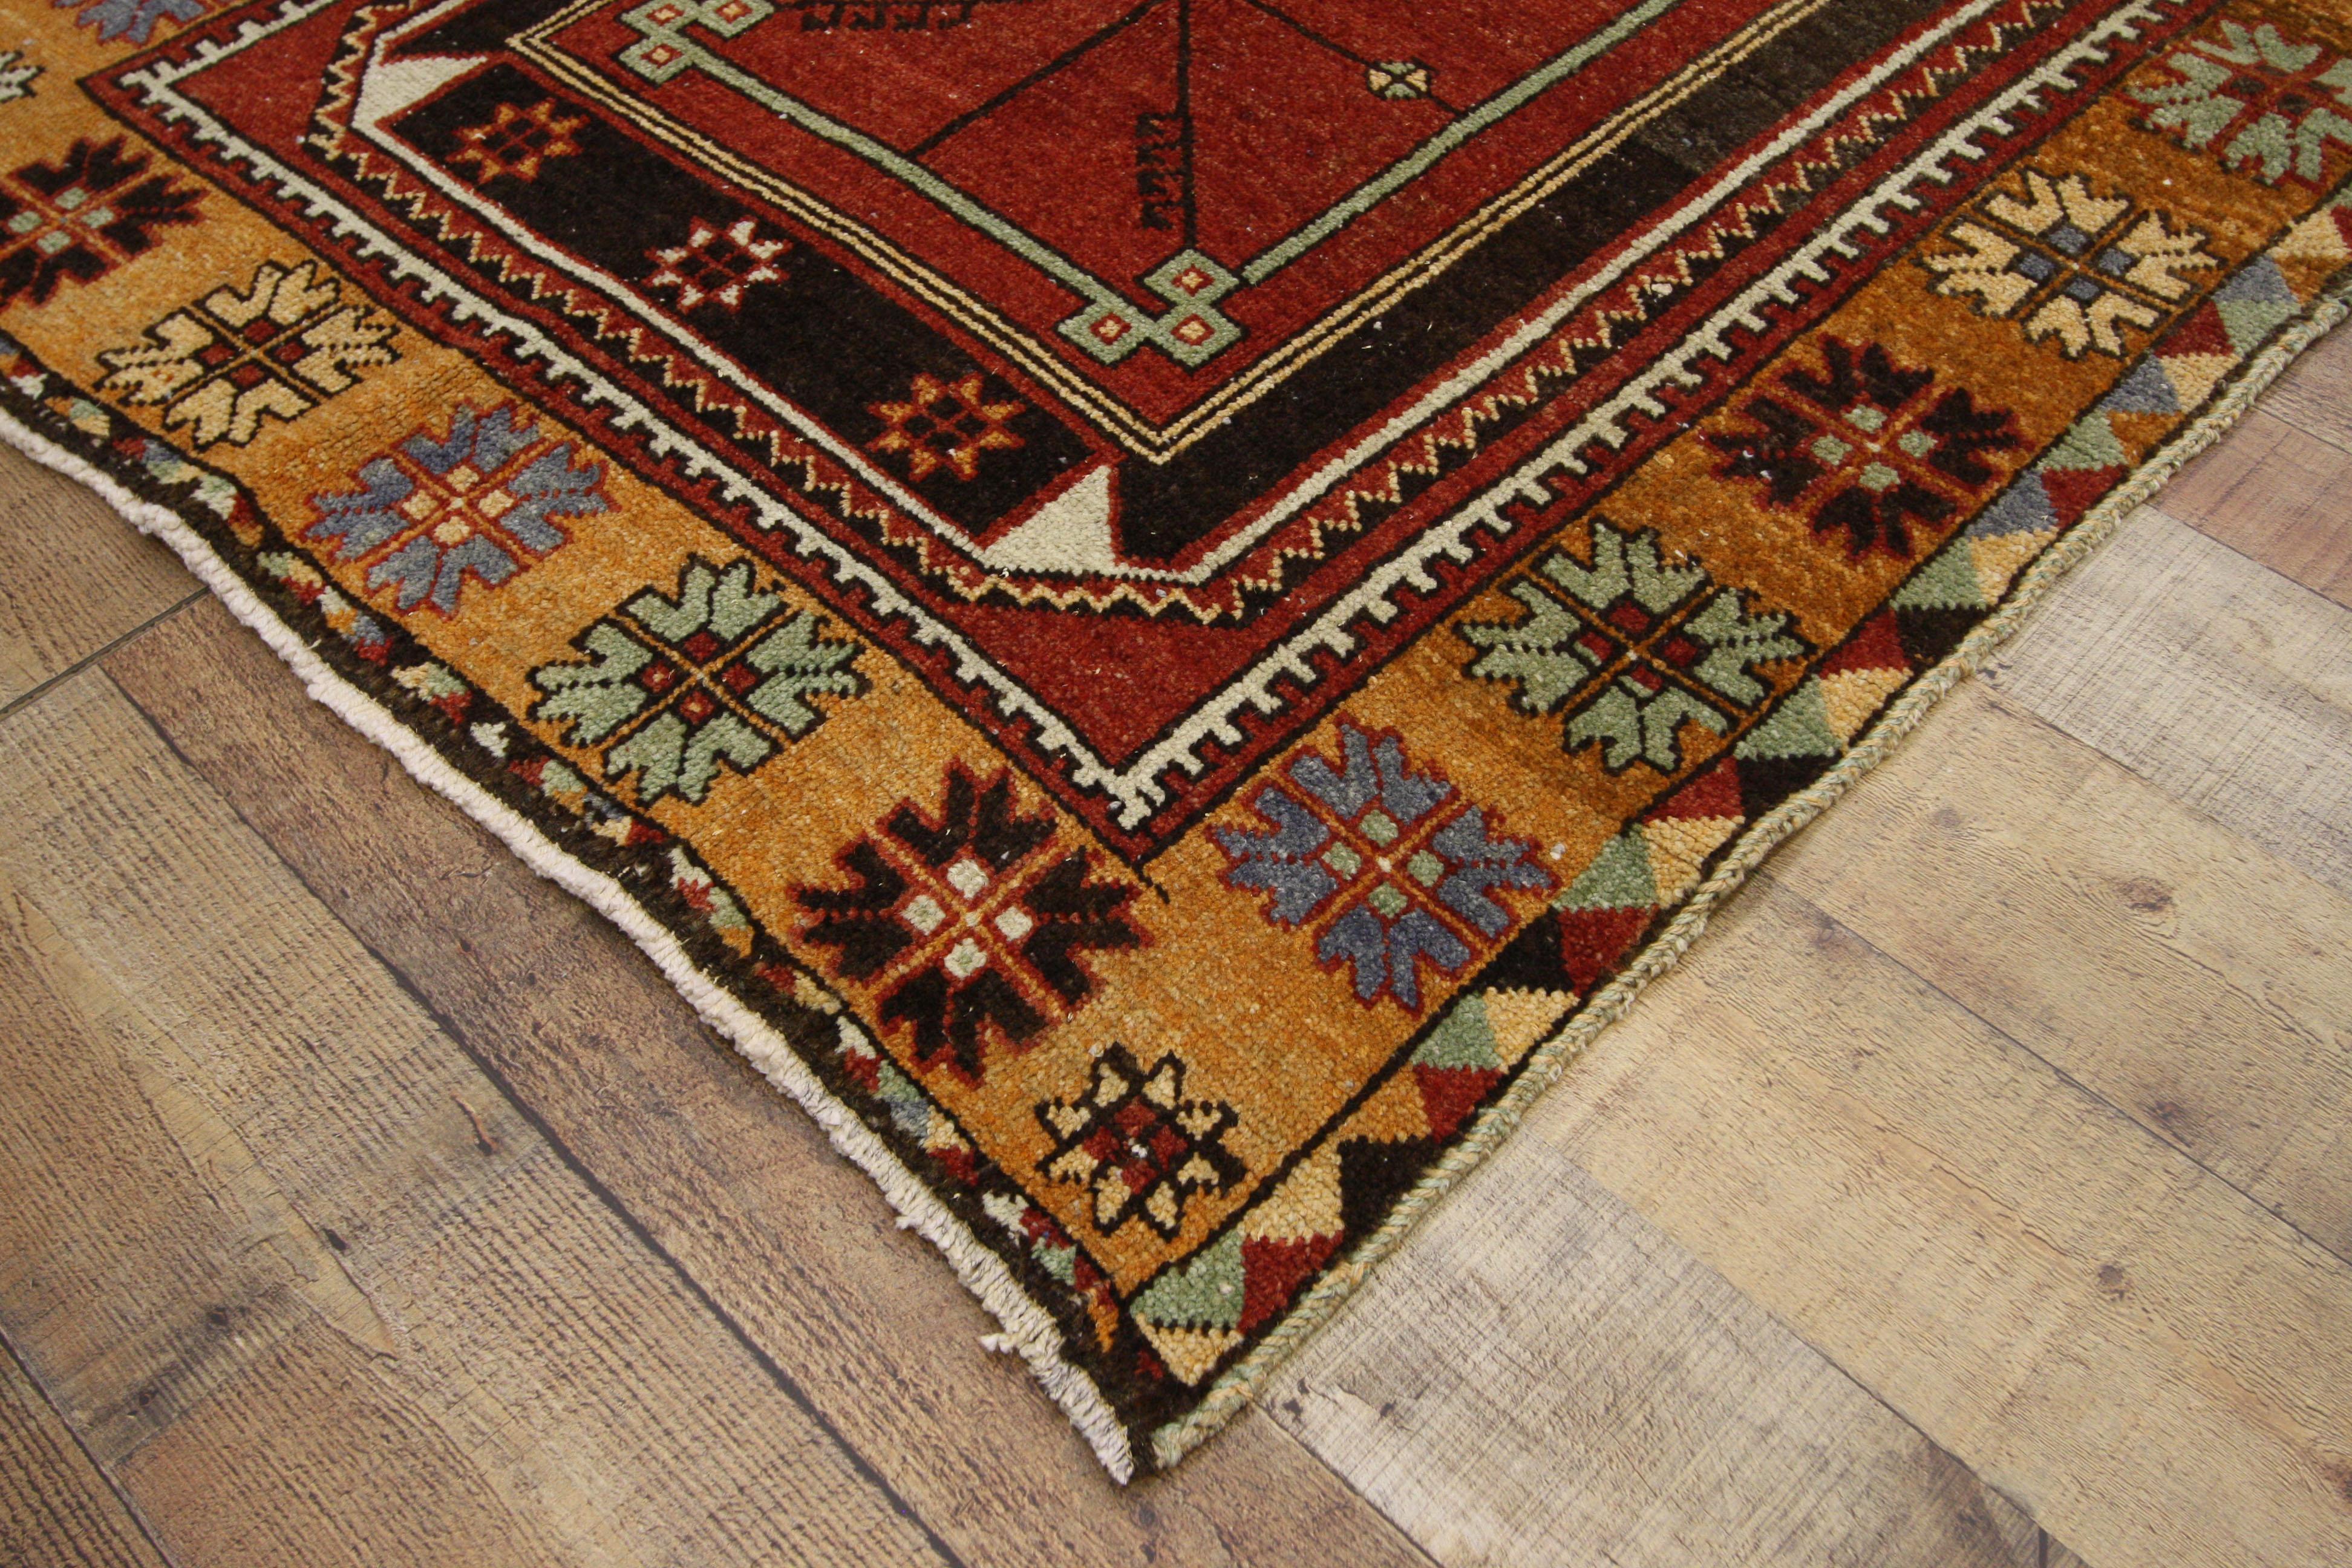 52393, vintage Turkish Oushak hallway runner with tribal Mission style. This hand knotted wool vintage Turkish Oushak runner features four large octagonal medallions spread across an abrashed field. Each medallion contains concentric rectangles with